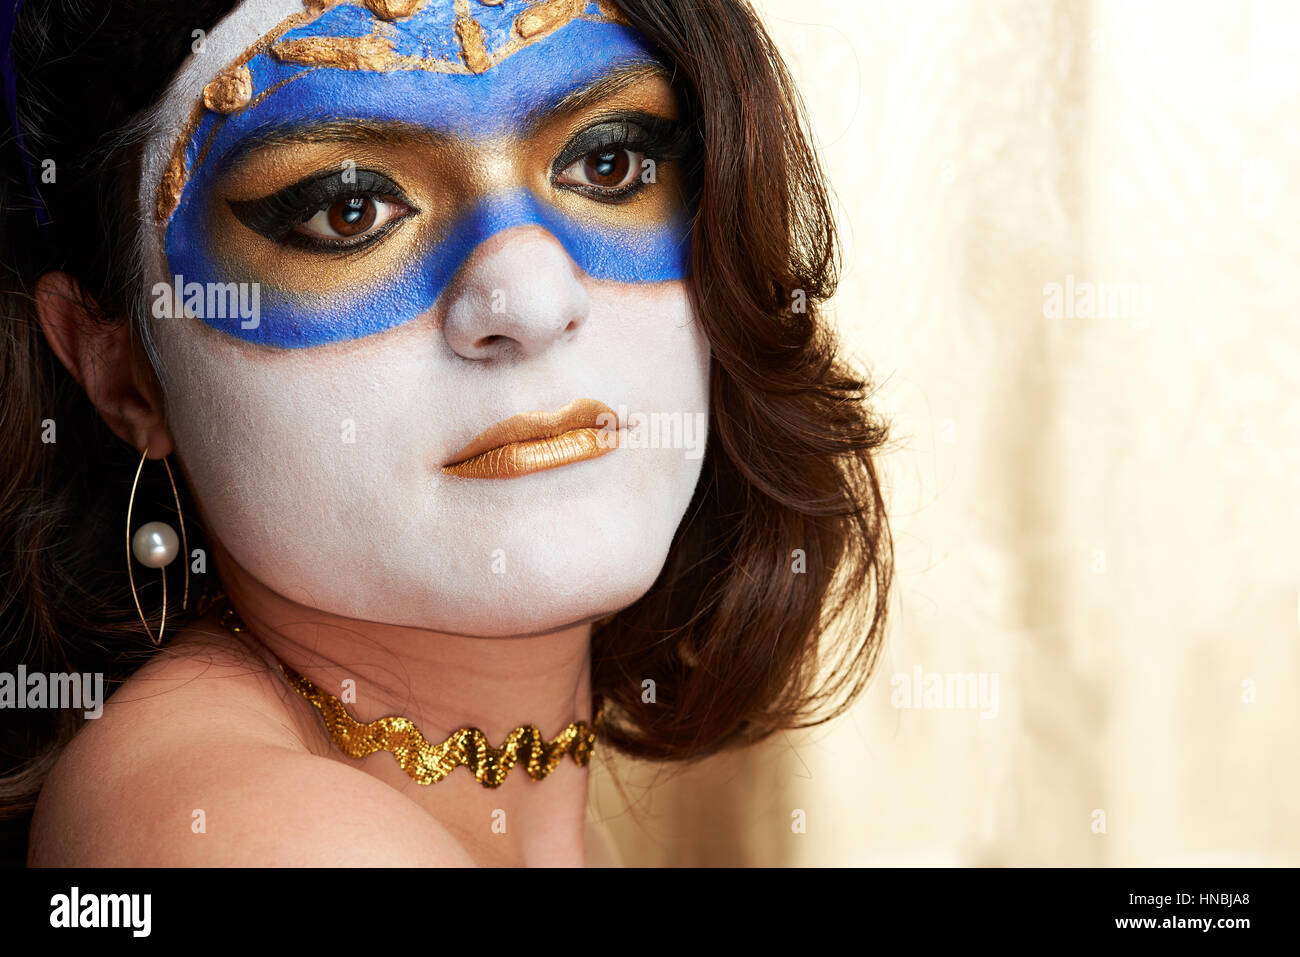 woman face with painted blue and golden mask Stock Photo